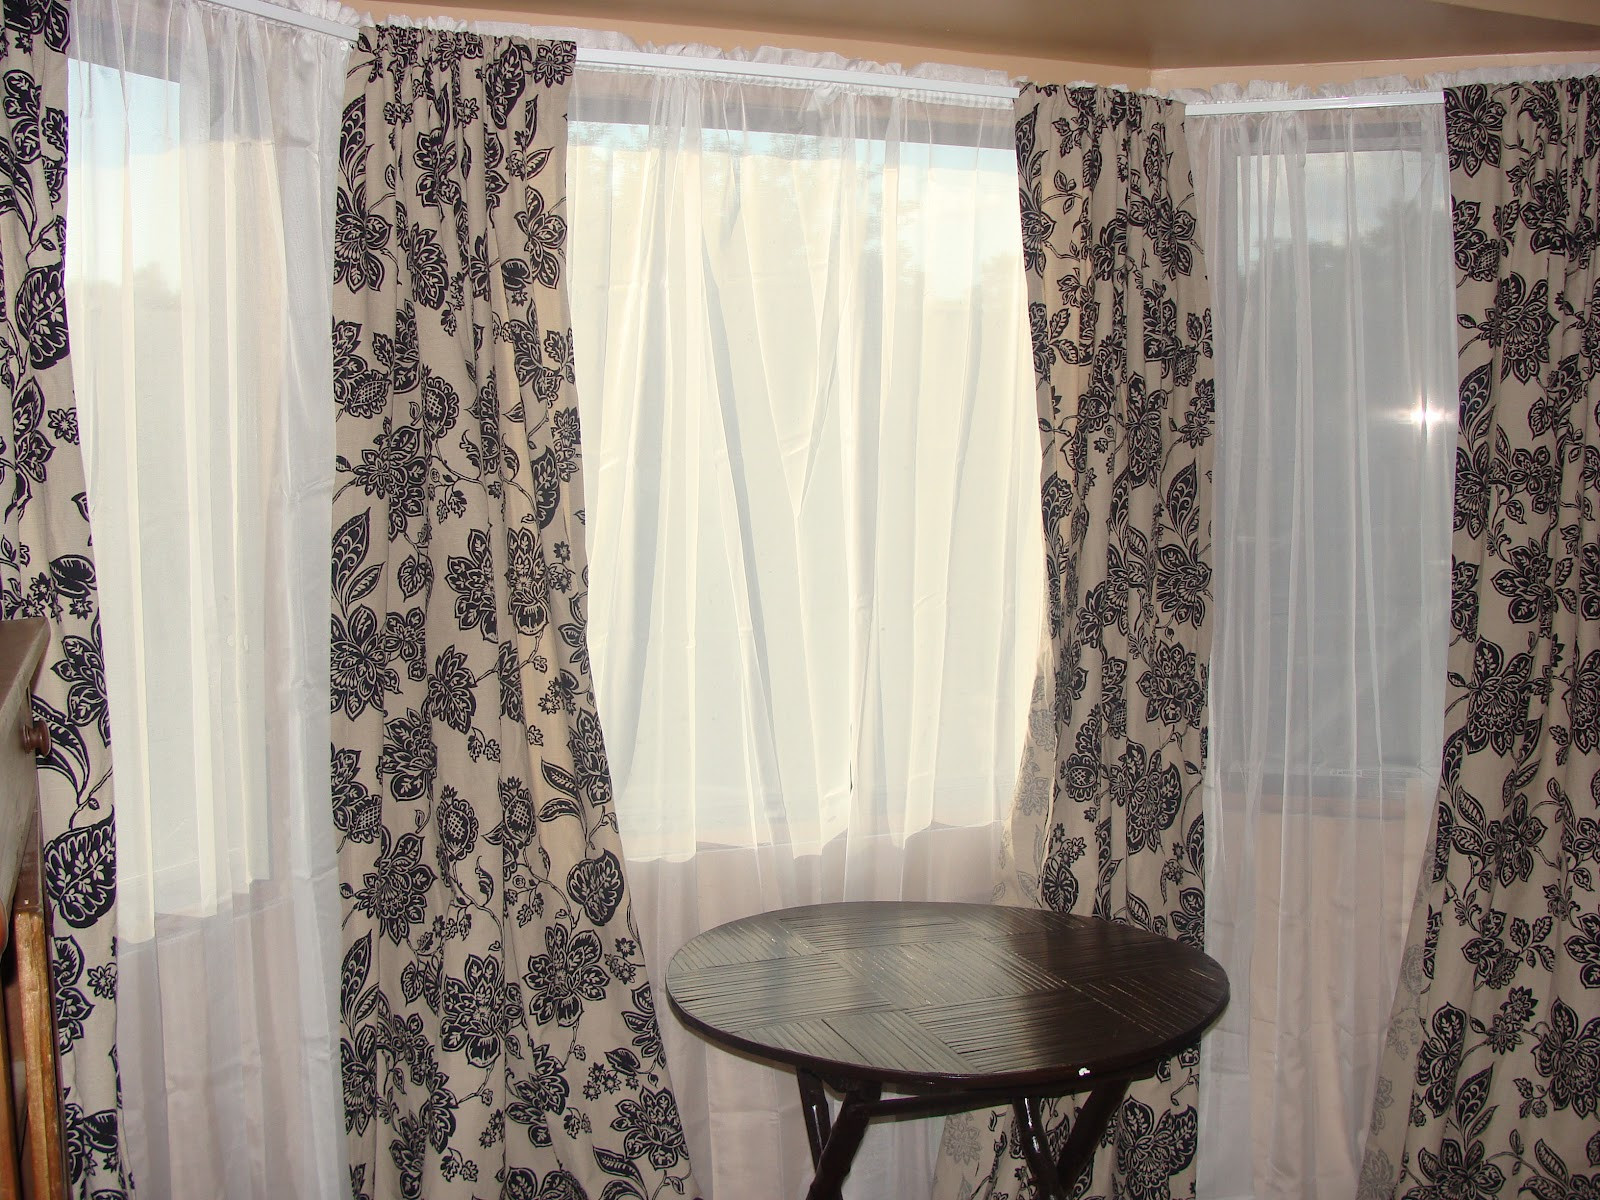 Jcpenney Living Room Curtains Beautiful Jcpenney Sheer Curtains With Valance Drapes Interior Of Jcpenney Living Room Curtains 